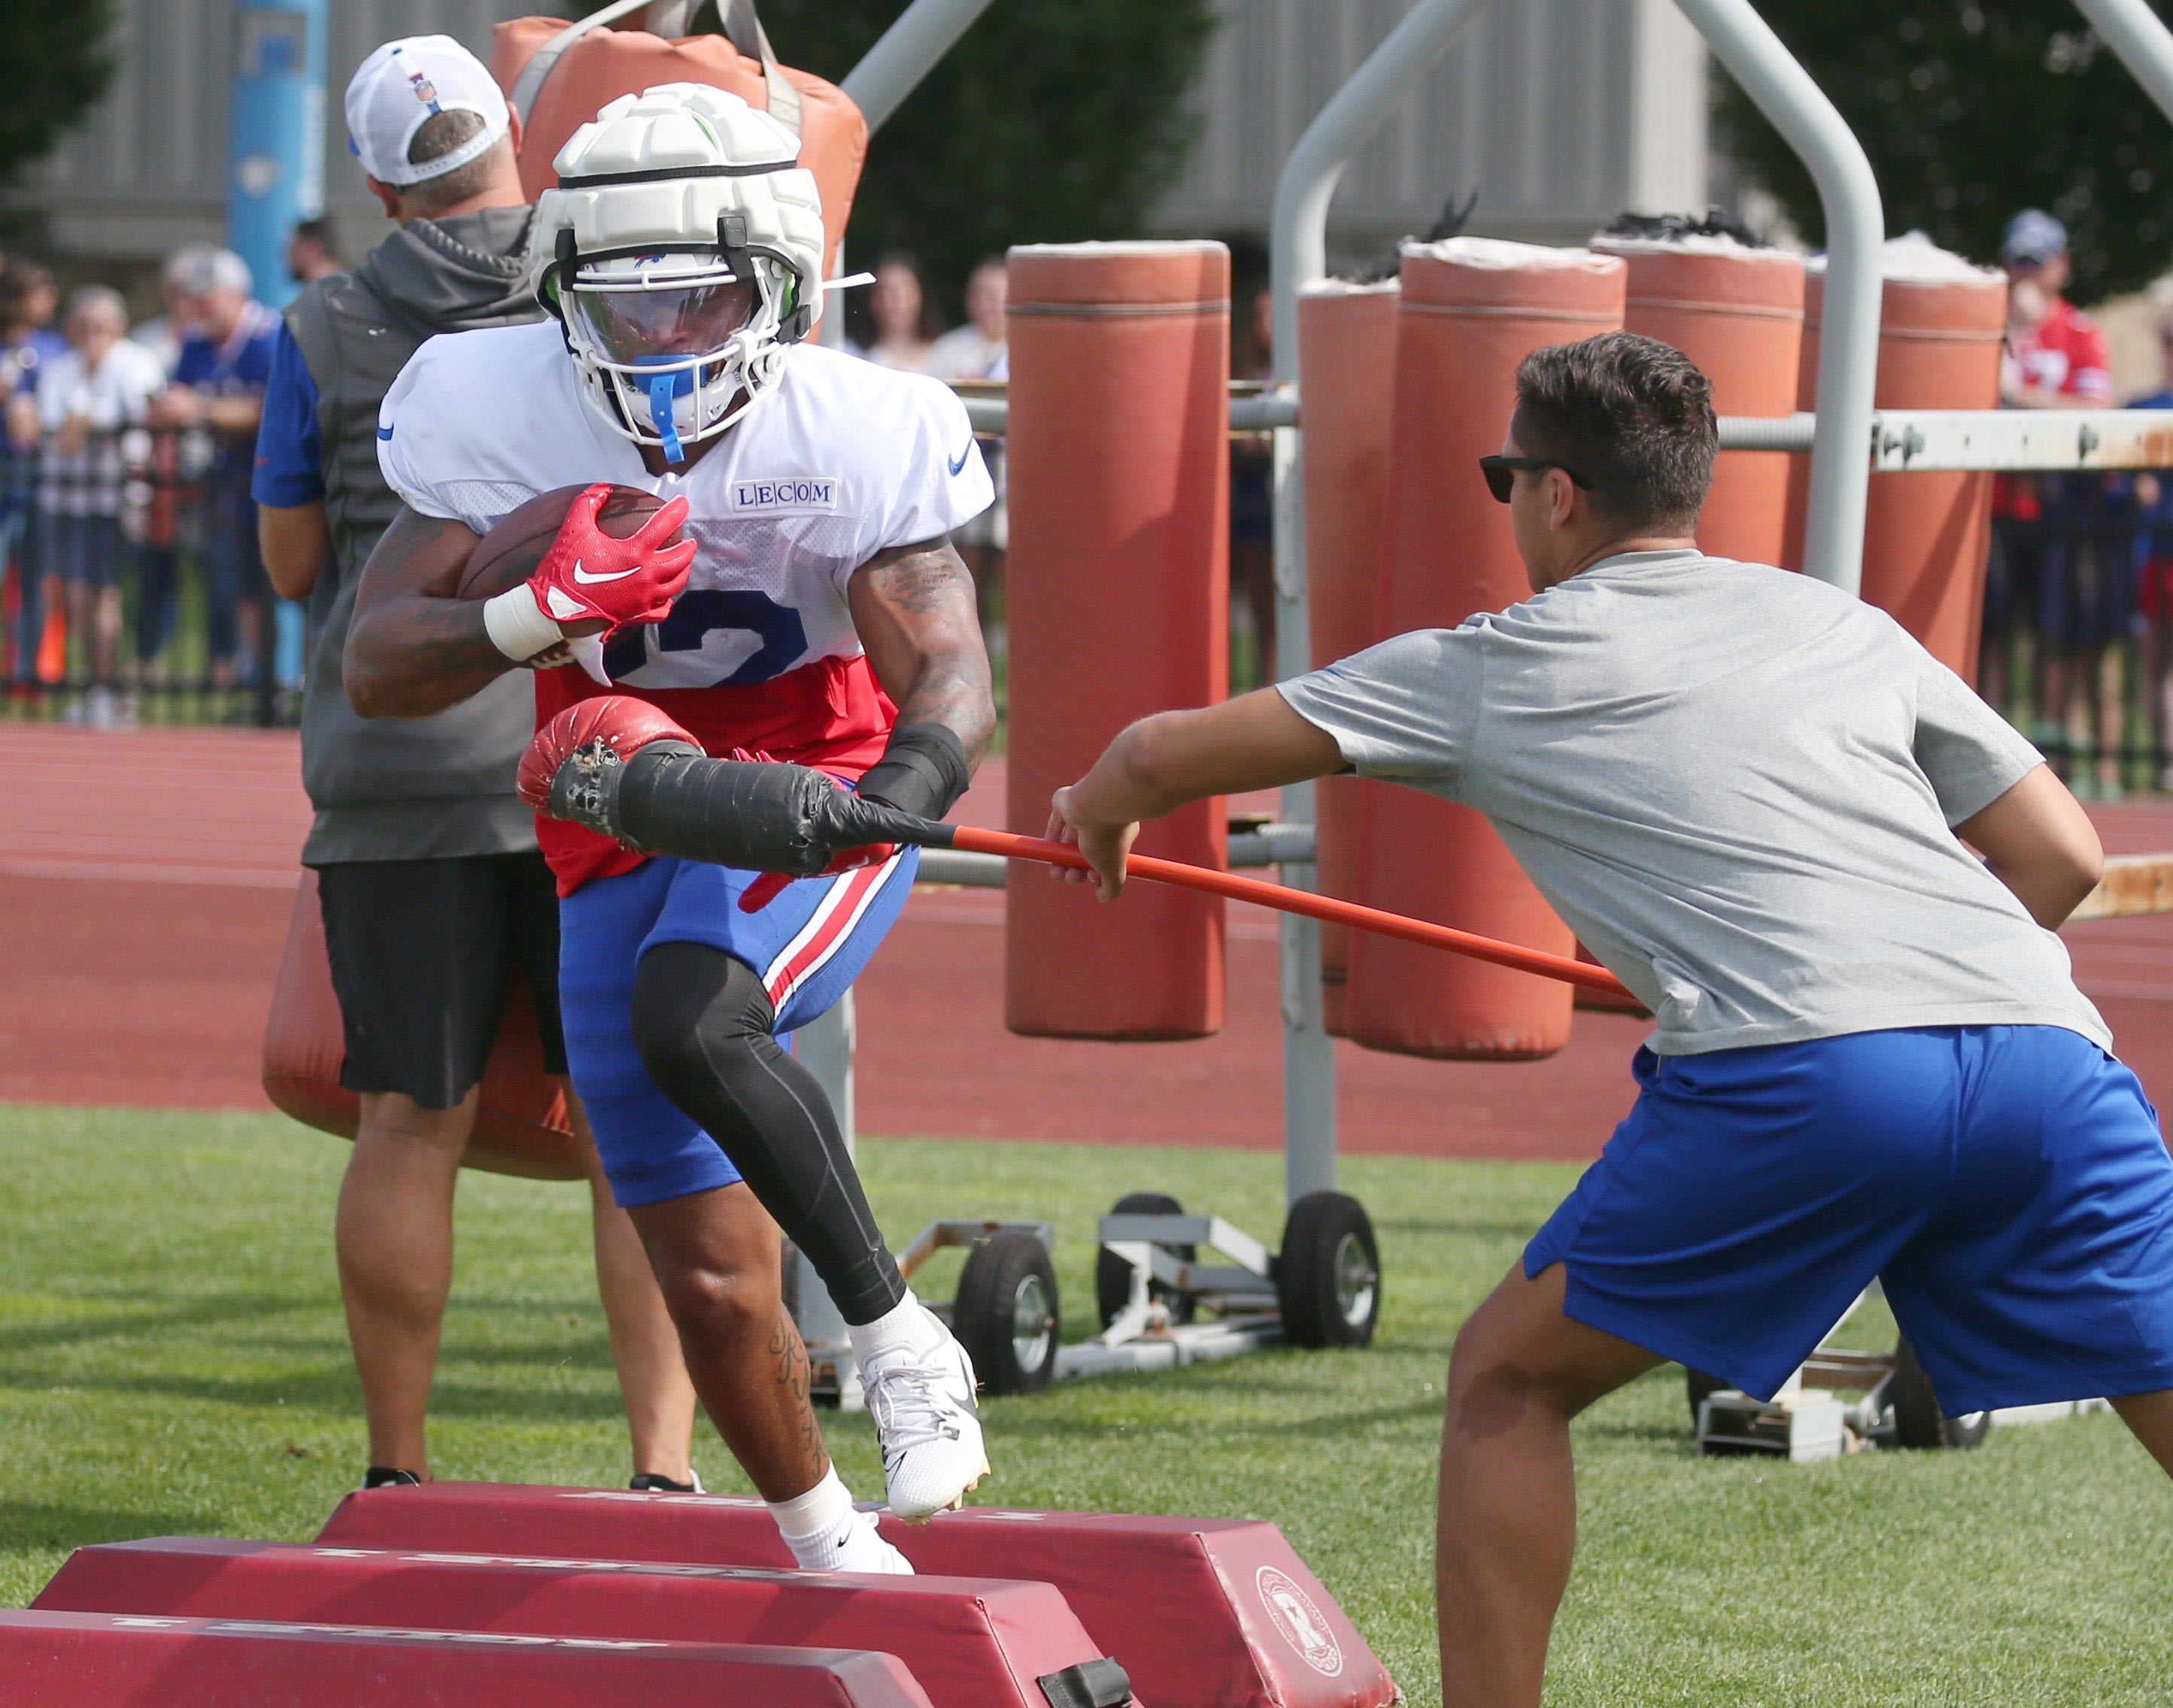 Sights and sounds from Bills training camp: Day 7